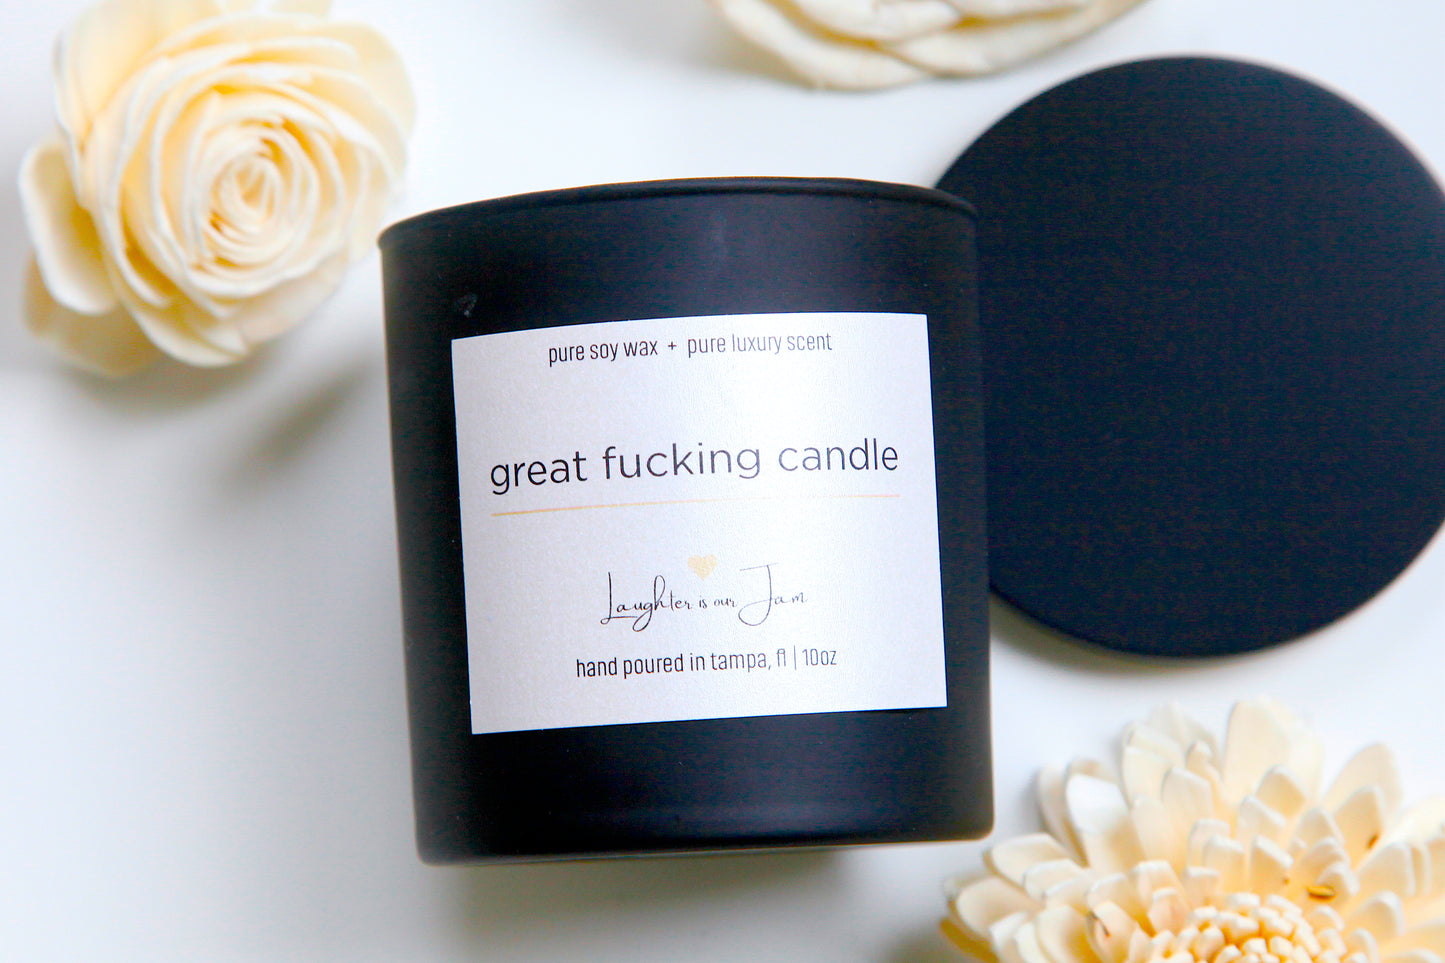 10 ounce matte black glass candle | great fucking candle